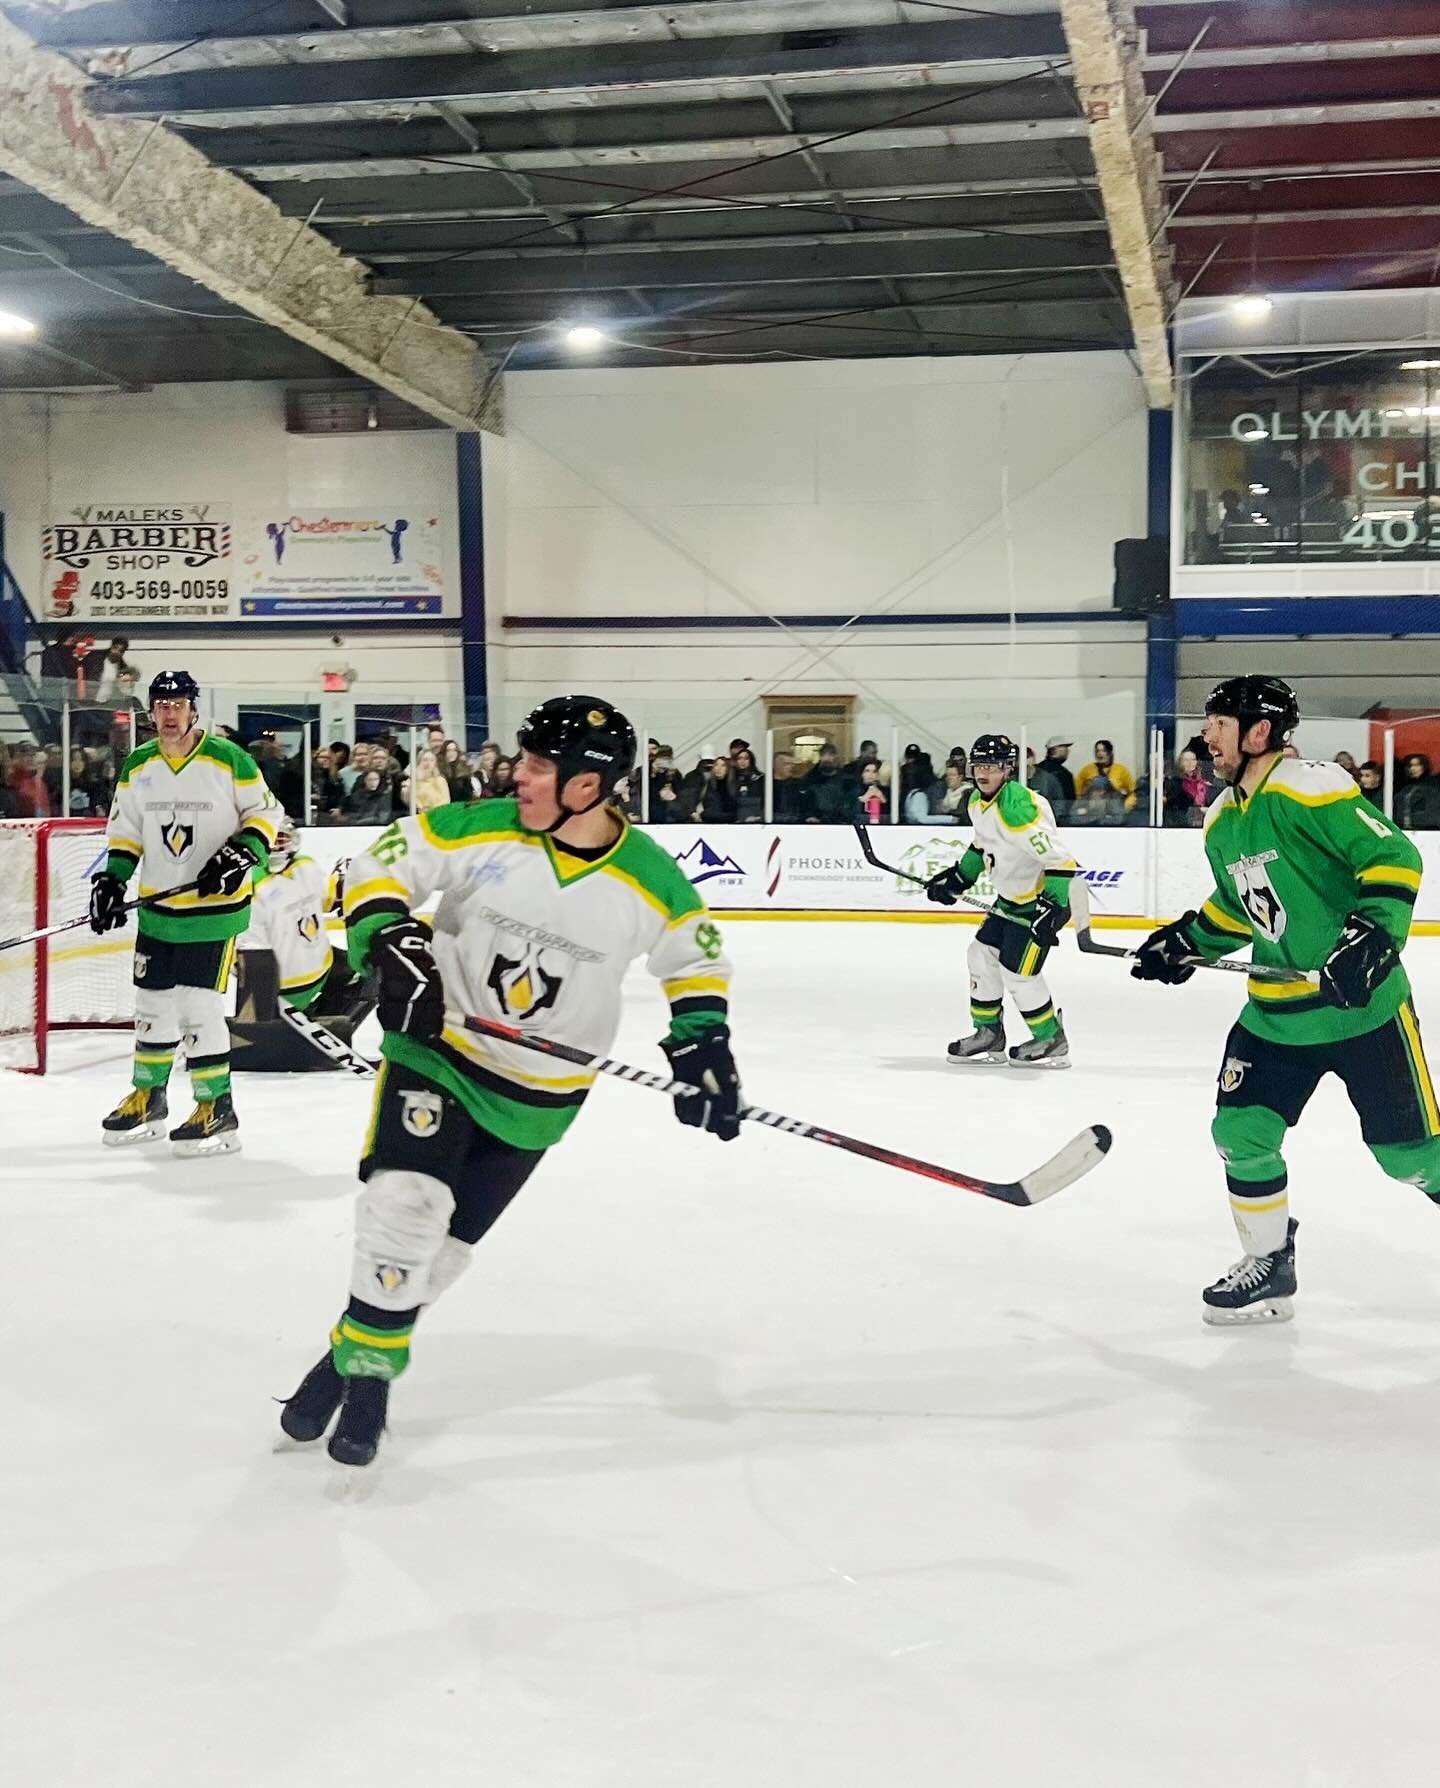 Congrats to our friends at @lpevents_northamerica for completing another great  @hockey_marathon event yesterday in Chestemere in support of the Alberta Children&rsquo;s Hospital Foundation.

Since April 5th, they have raised funds over 1.4 million d